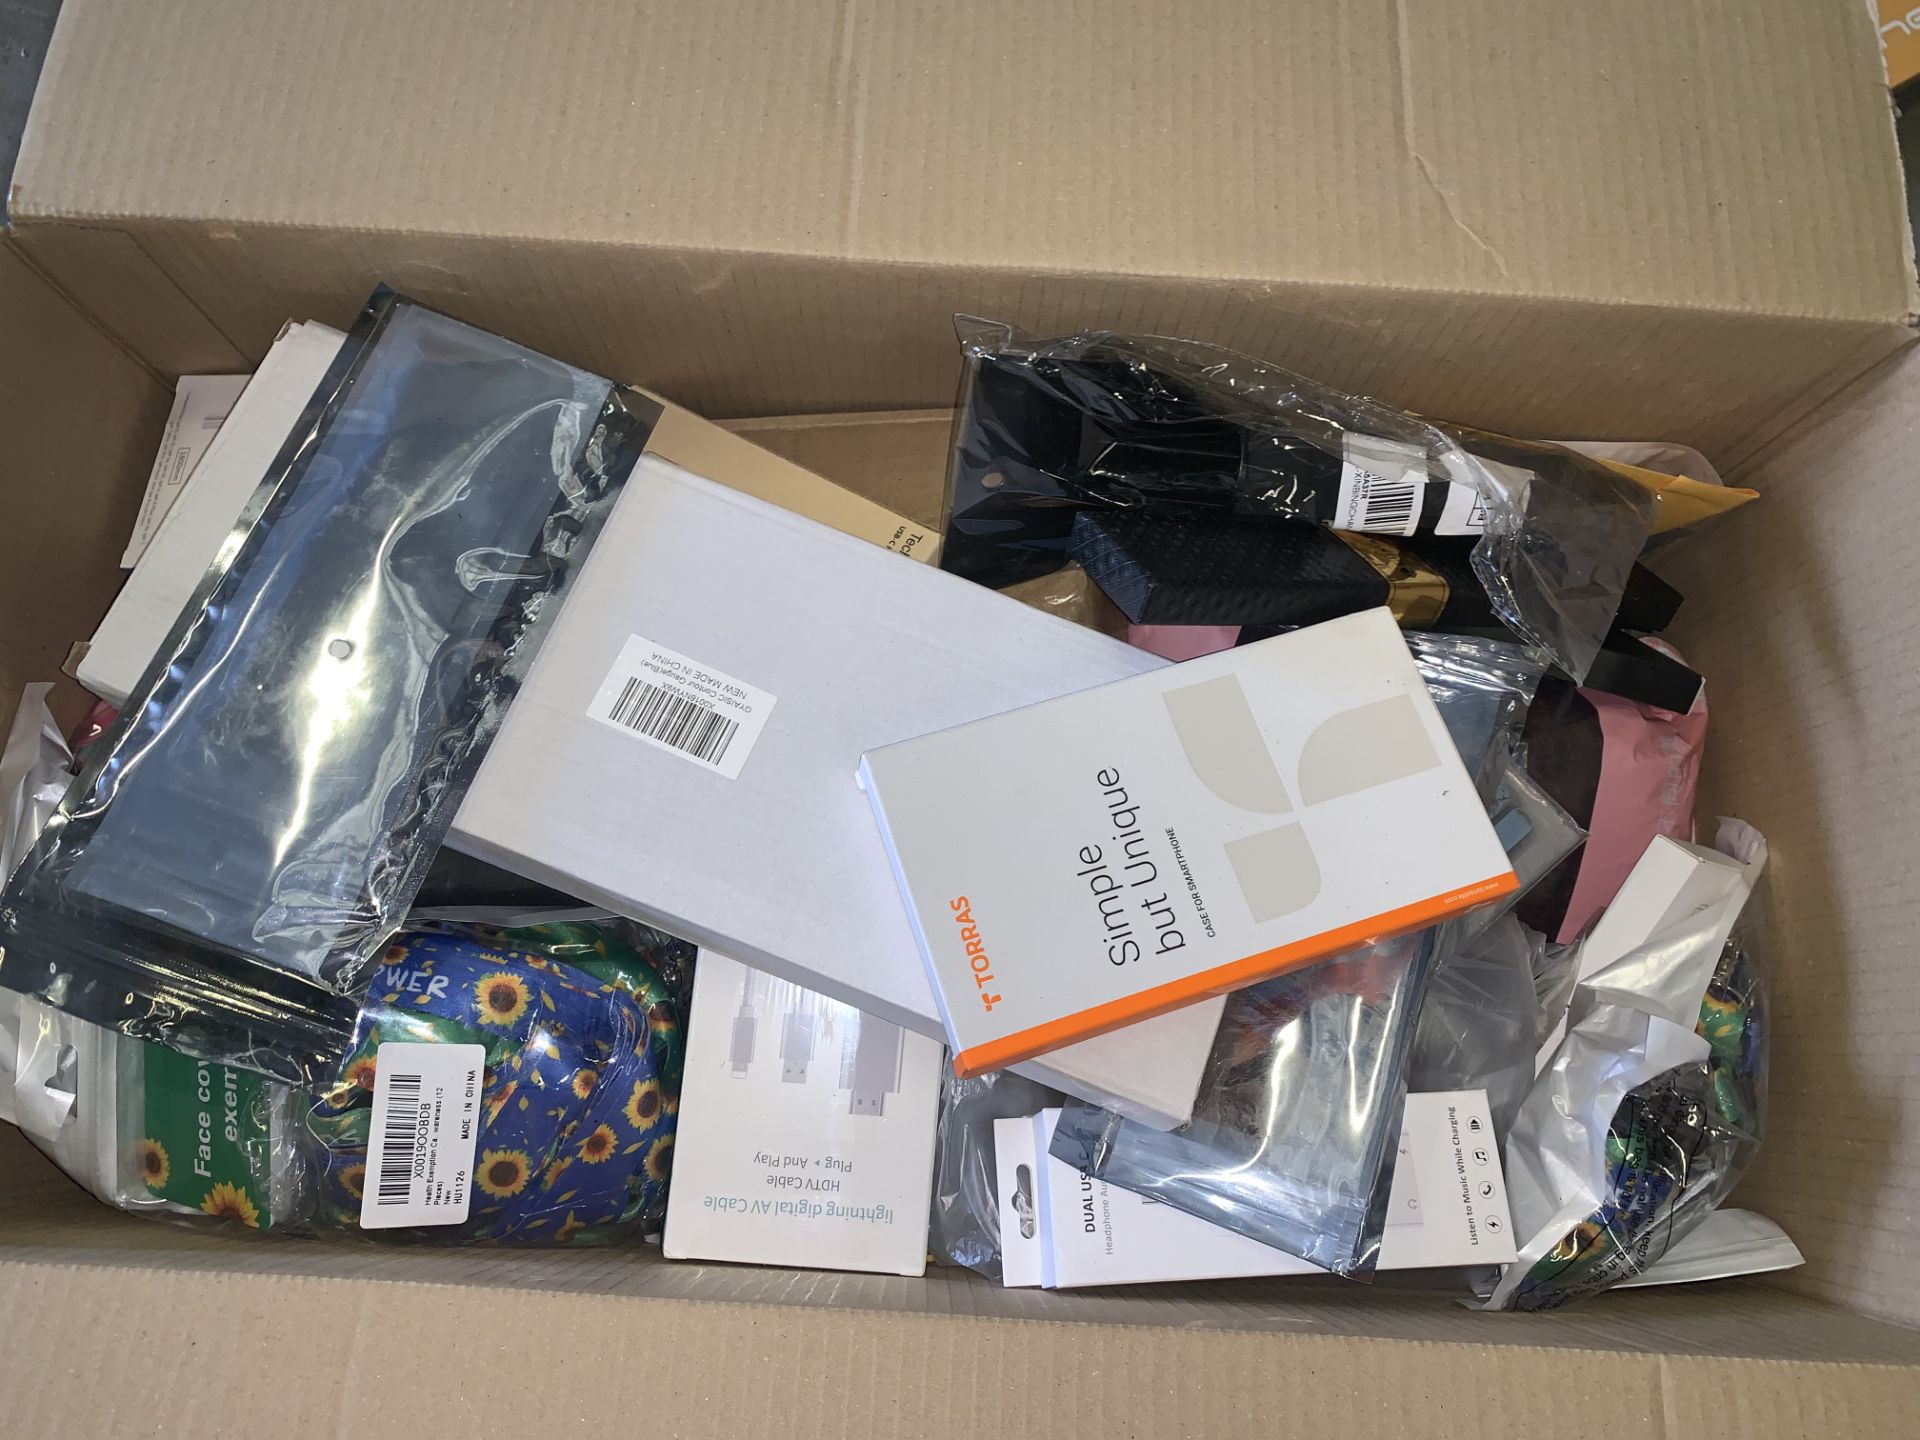 60 PIECE AMAZON END OF LINE LOT INCLUDING LIGHTNING CABLES, STEEL CHAINS, PHONE ACCESSORIES ETC